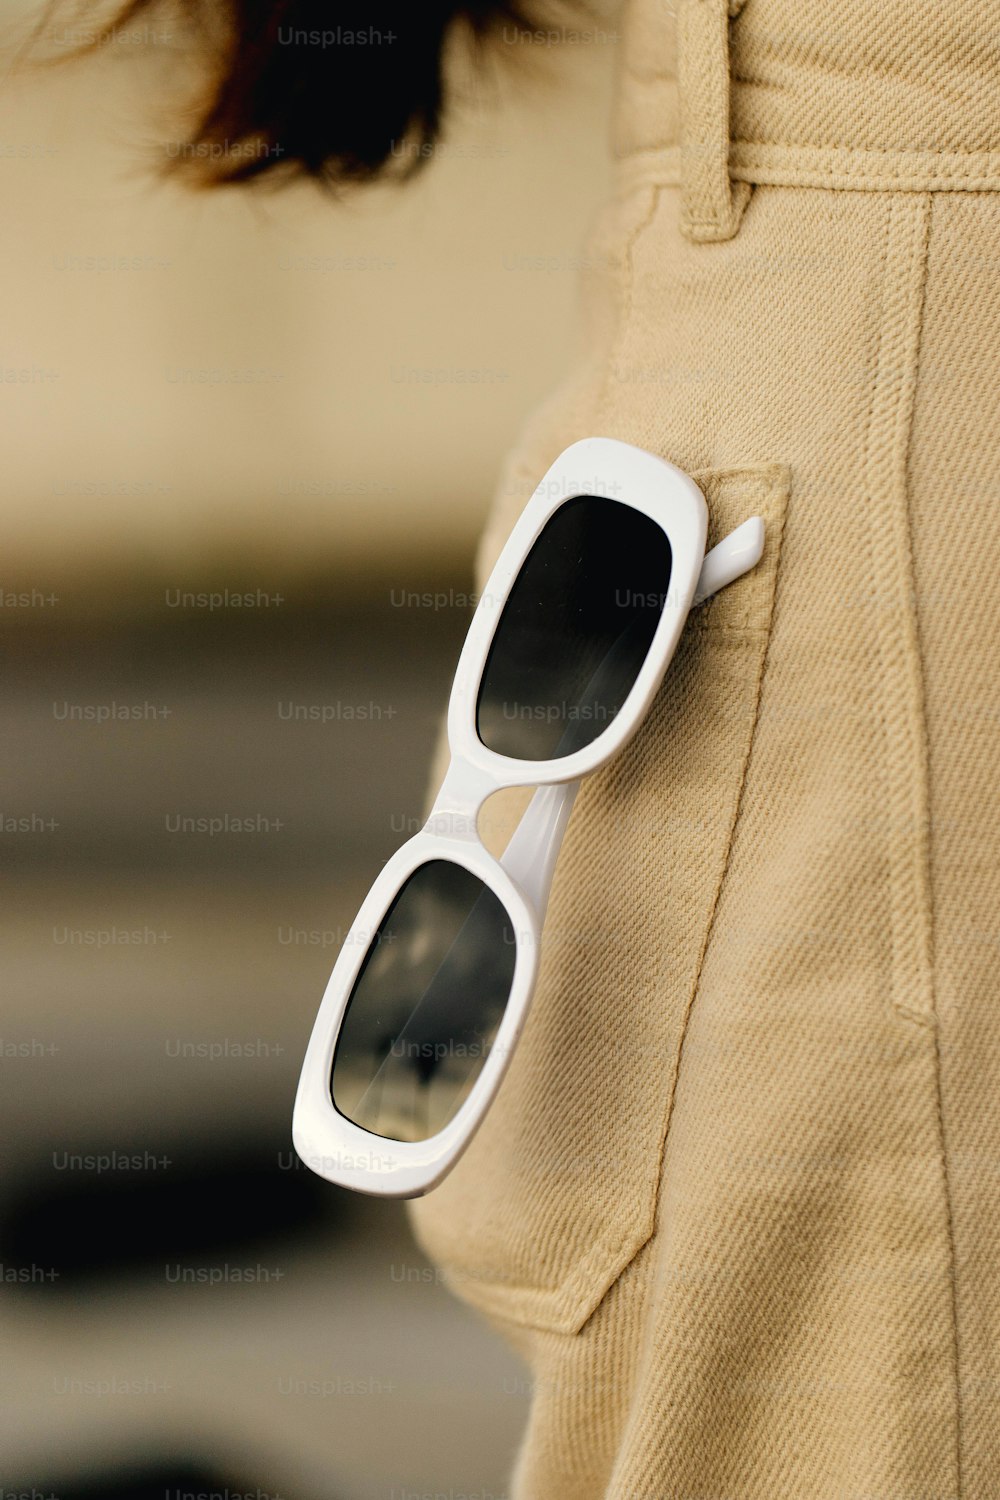 a pair of white sunglasses resting on the pocket of a woman's pants